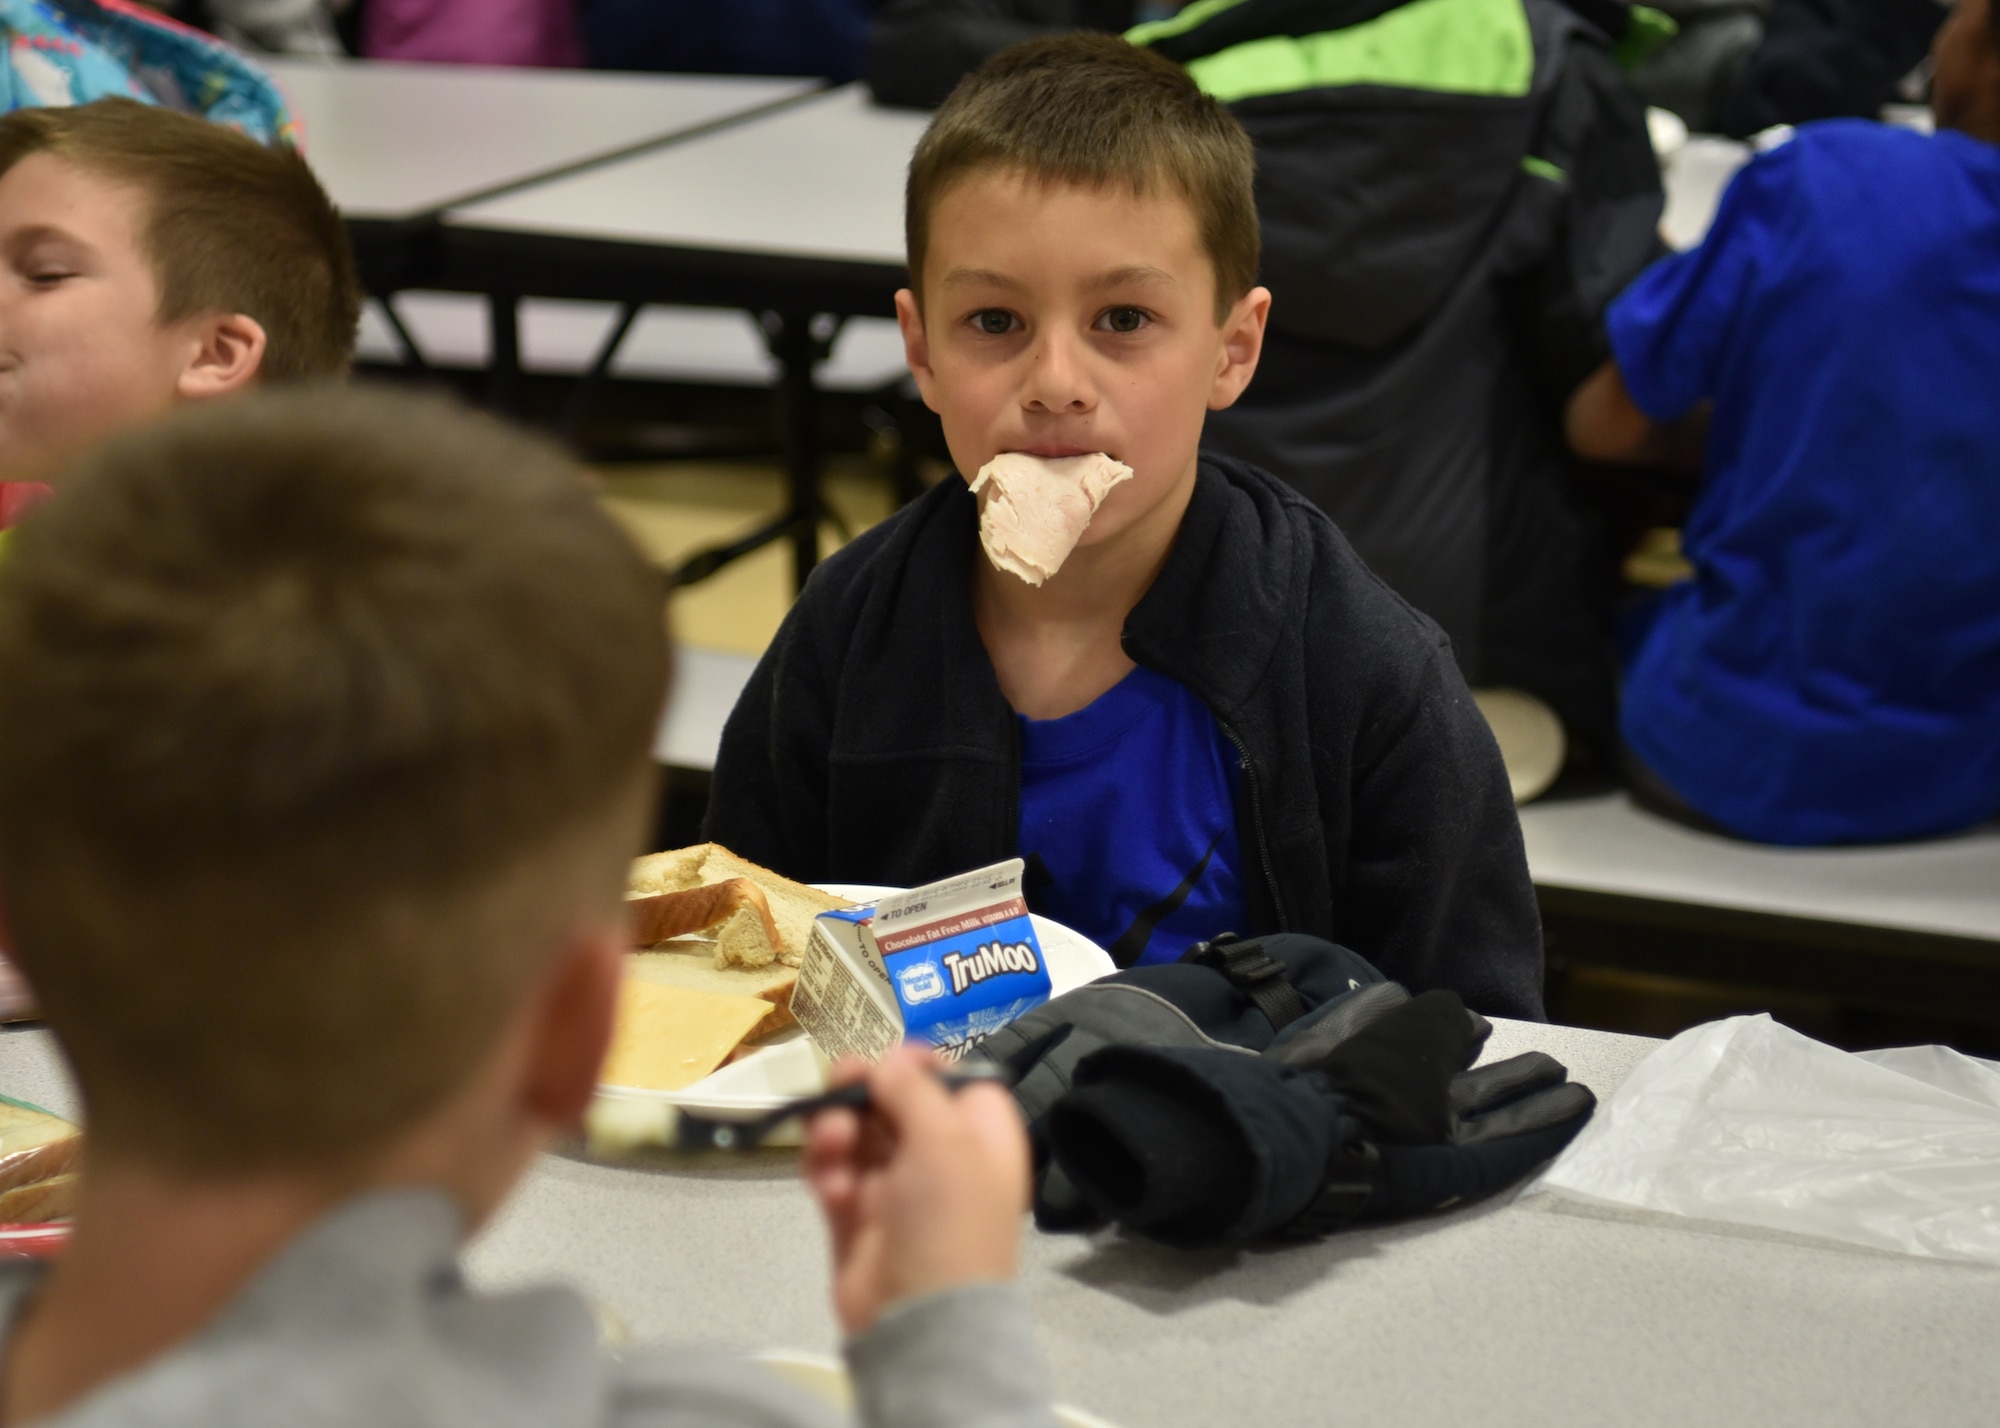 Reagan eats lunch at school, April 15, 2019, in Cheyenne, Wyo. Reagan like most seven-year-olds loves to play games and not do his homework, despite that, he does what he is told to do. (U.S. Air Force photo by Airman 1st Class Braydon Williams)